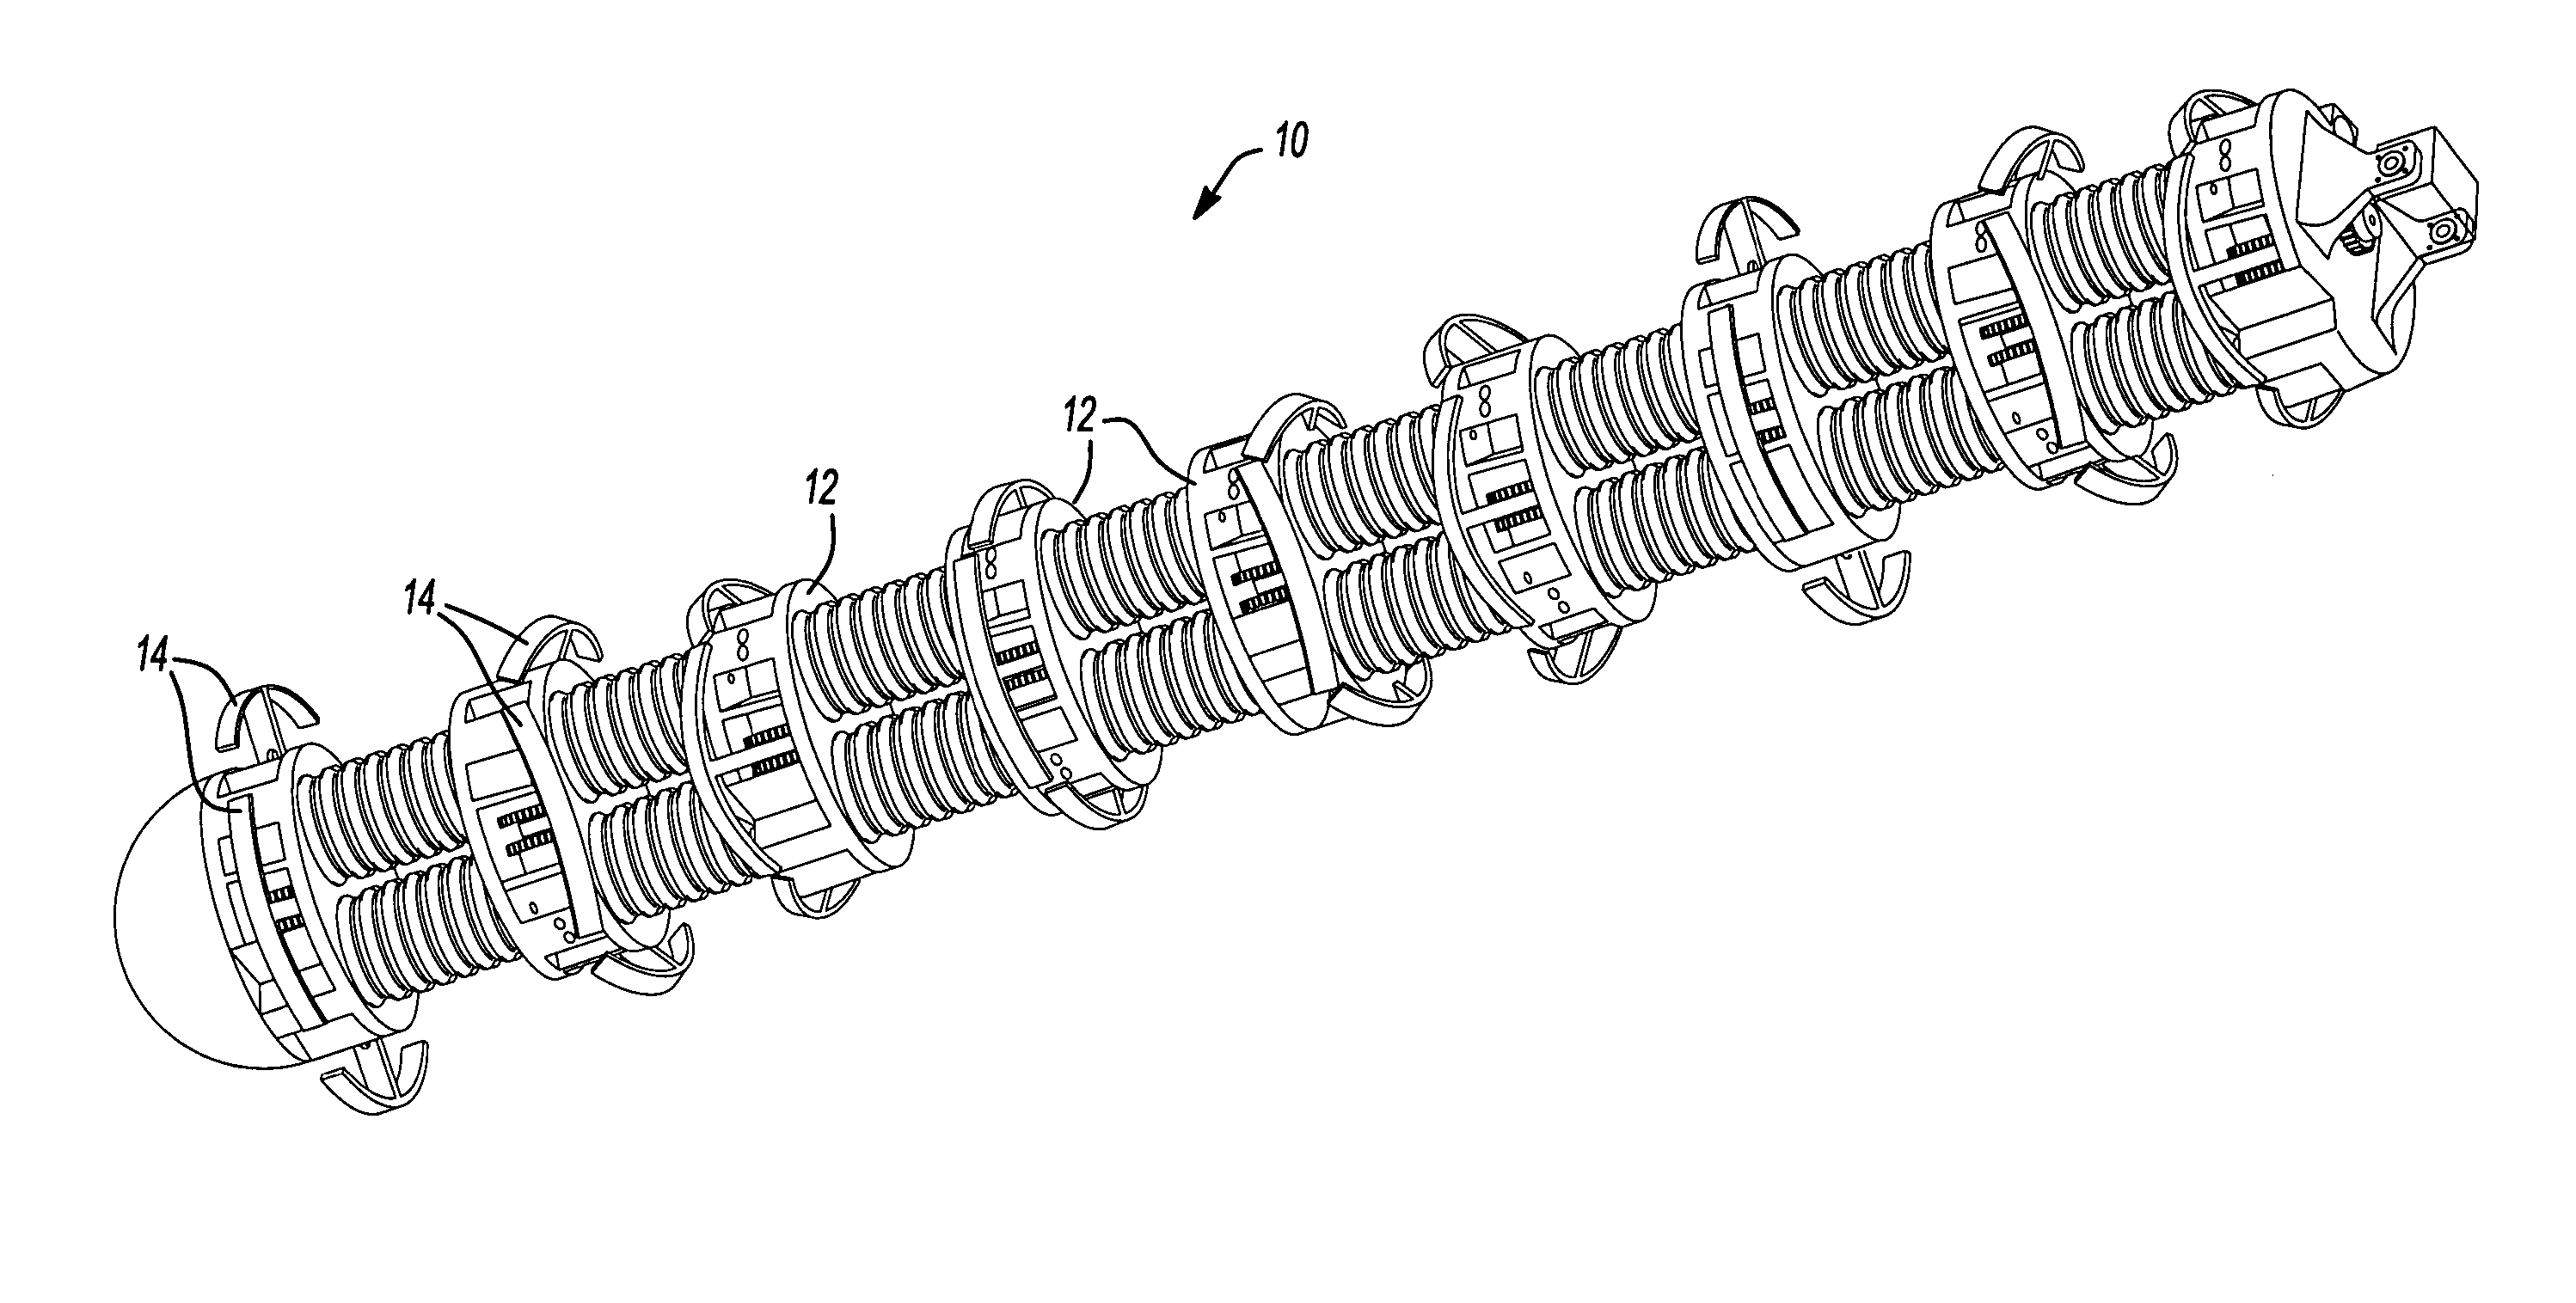 Integrated, proportionally controlled, and naturally compliant universal joint actuator with controllable stiffness